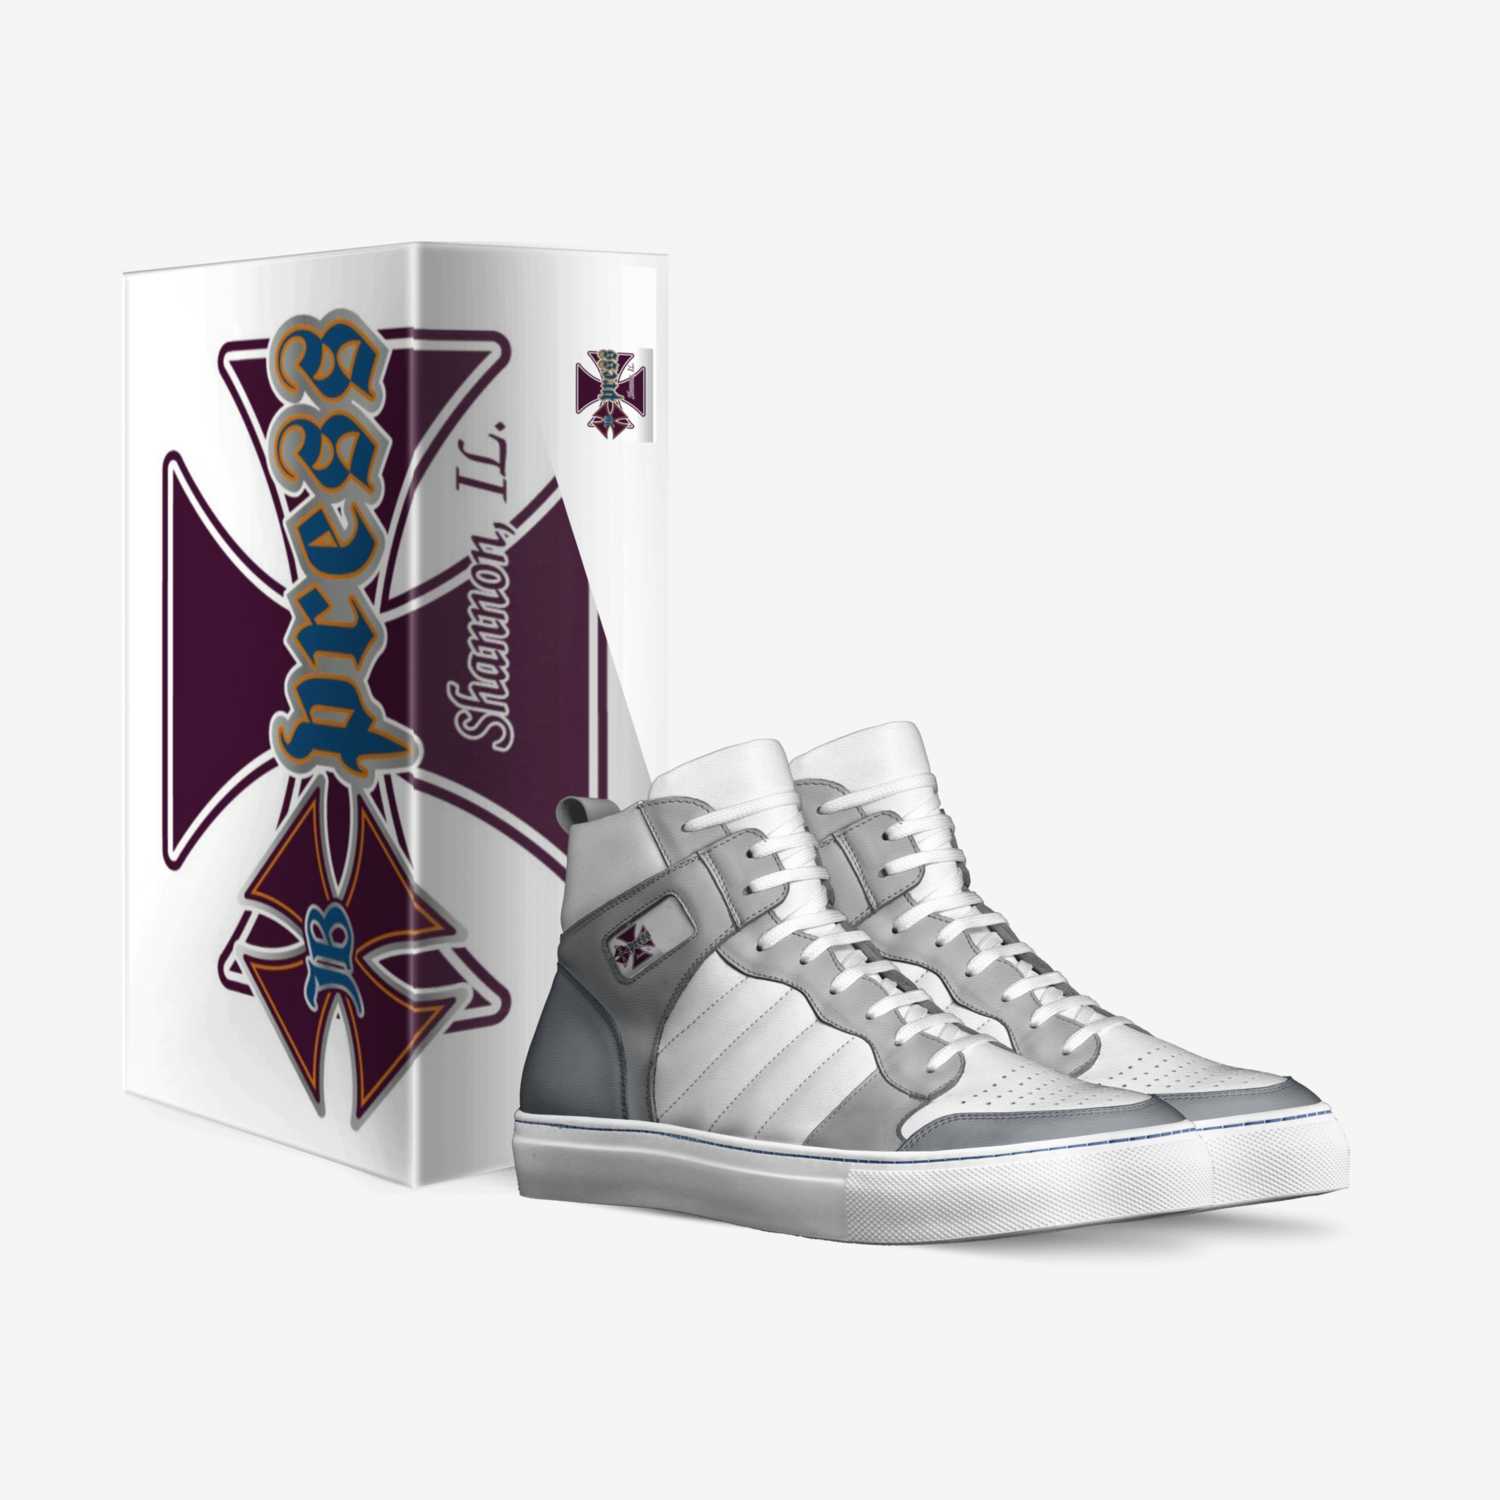 Iron Cross, West Coast Choppers Sneakers High